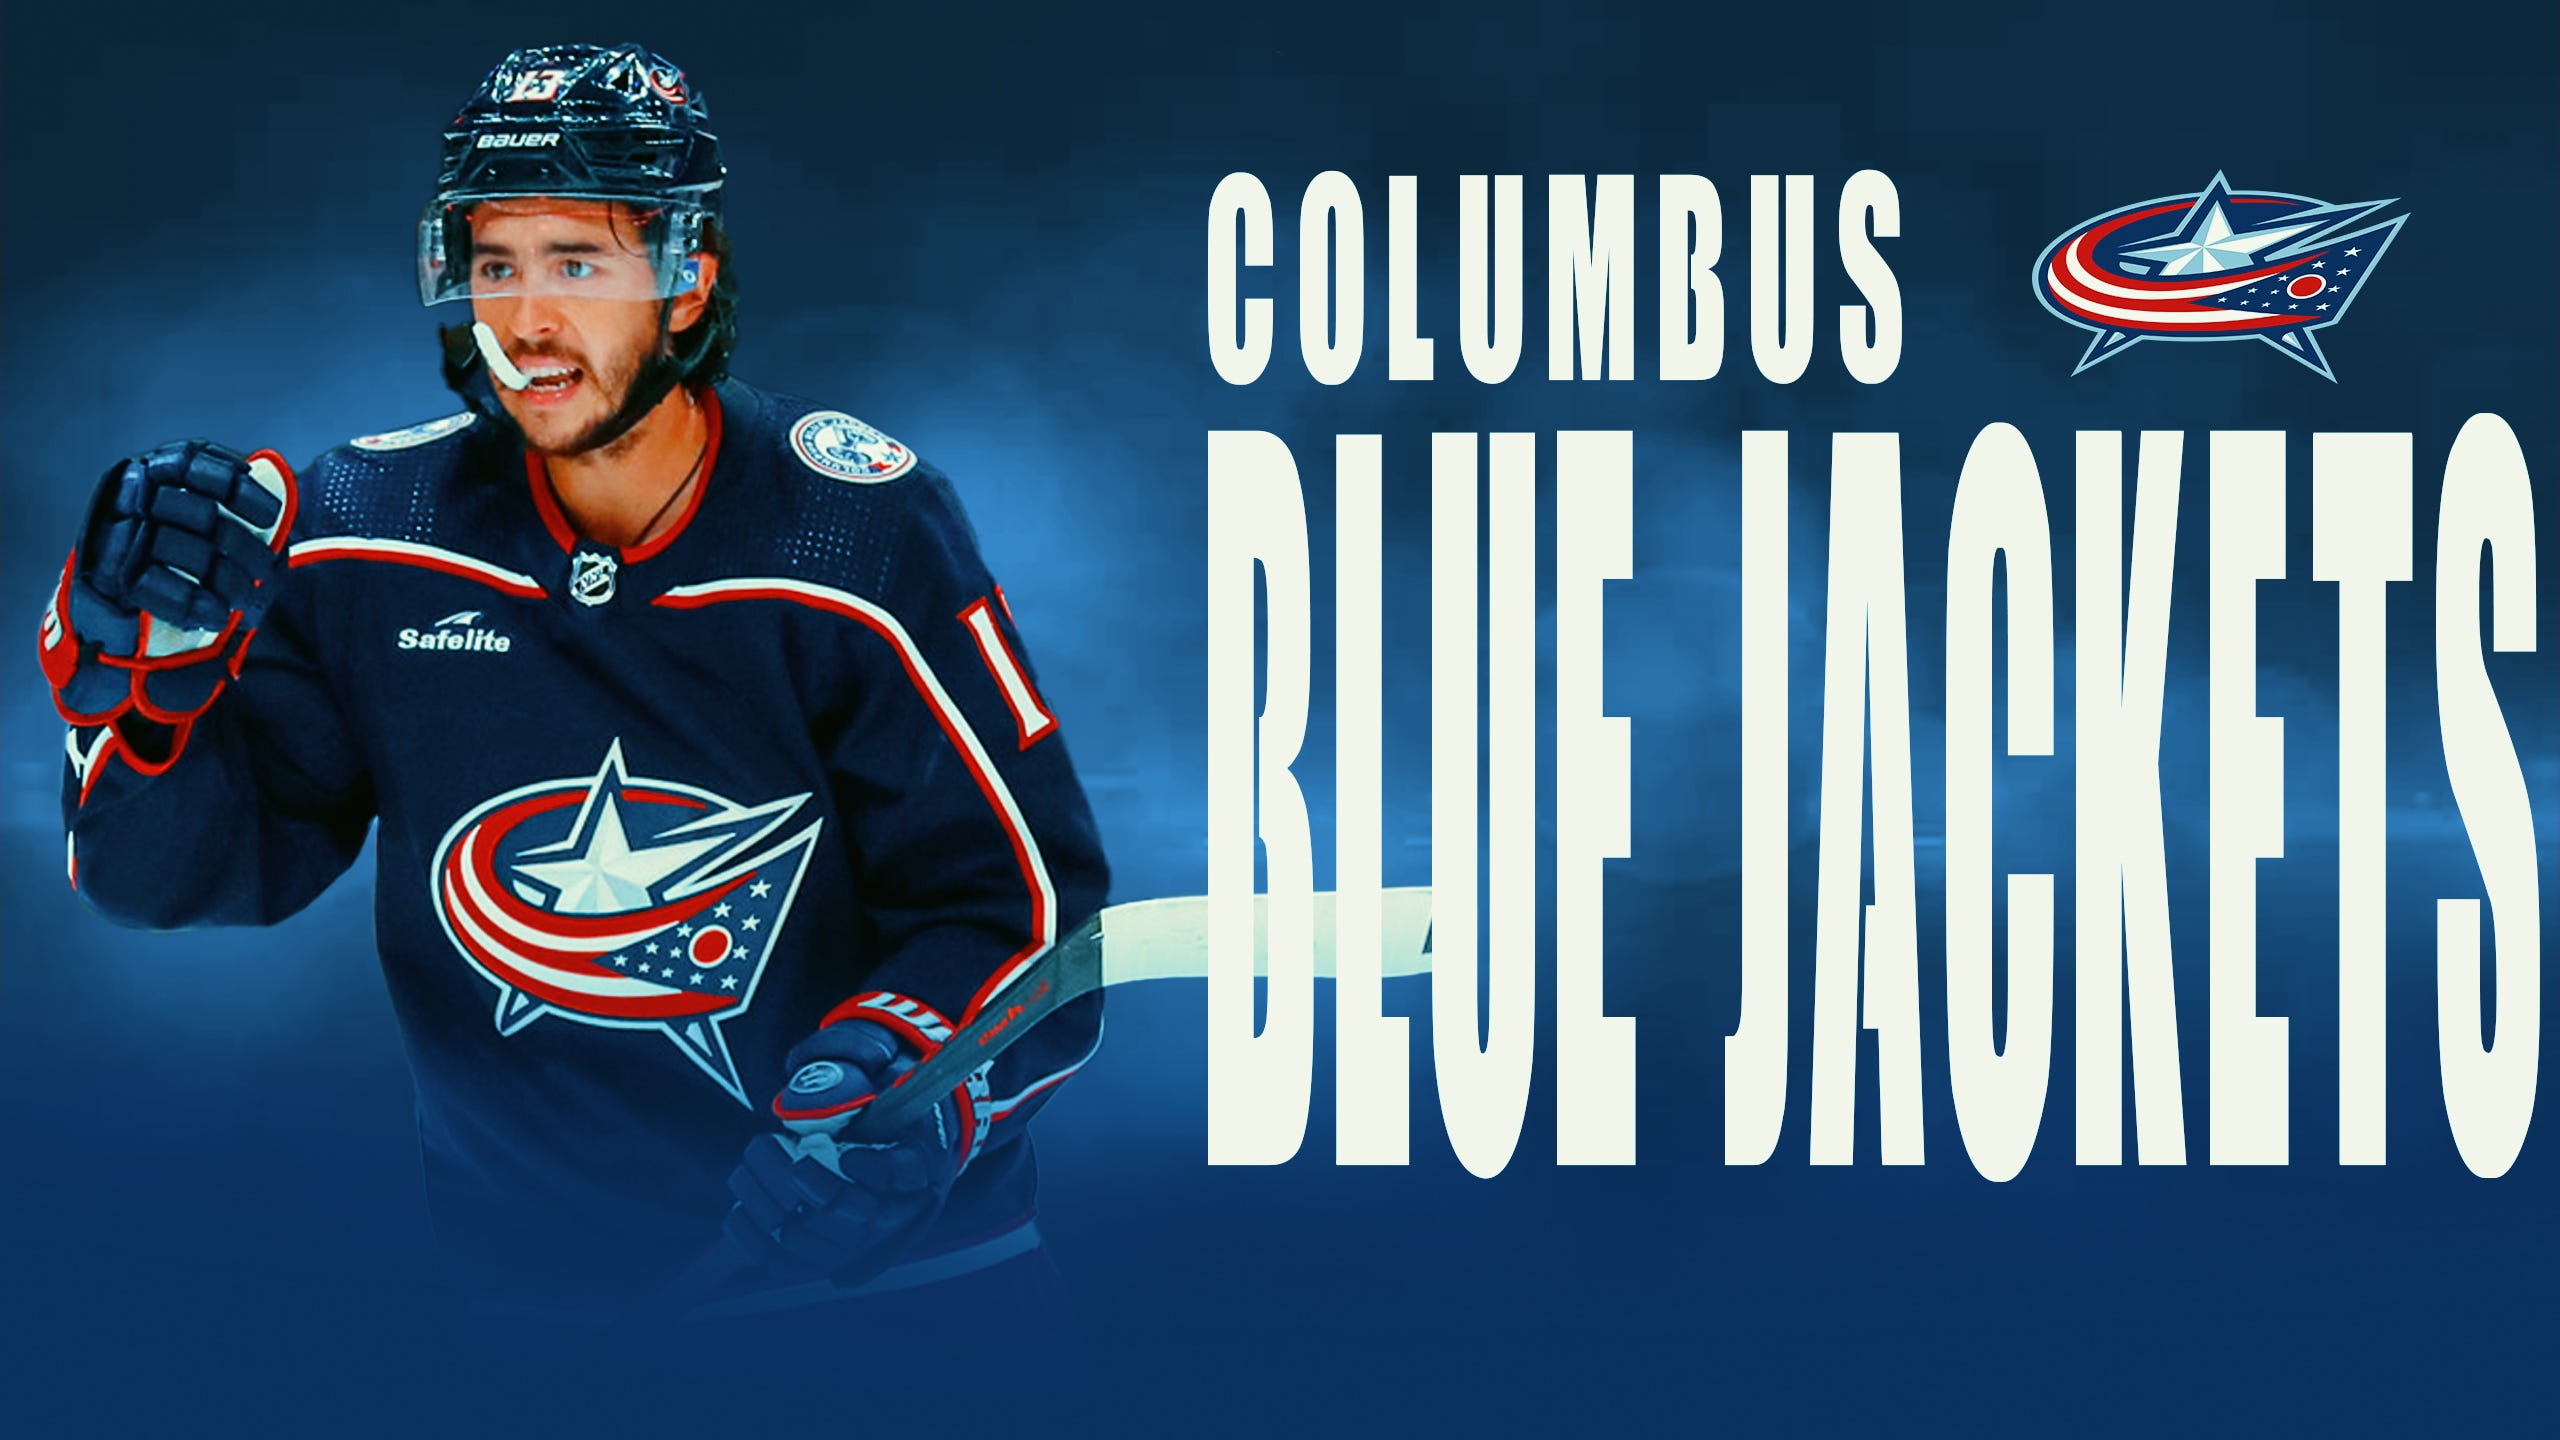 Blue Jackets' Laine excited to stay in Columbus, play with Gaudreau